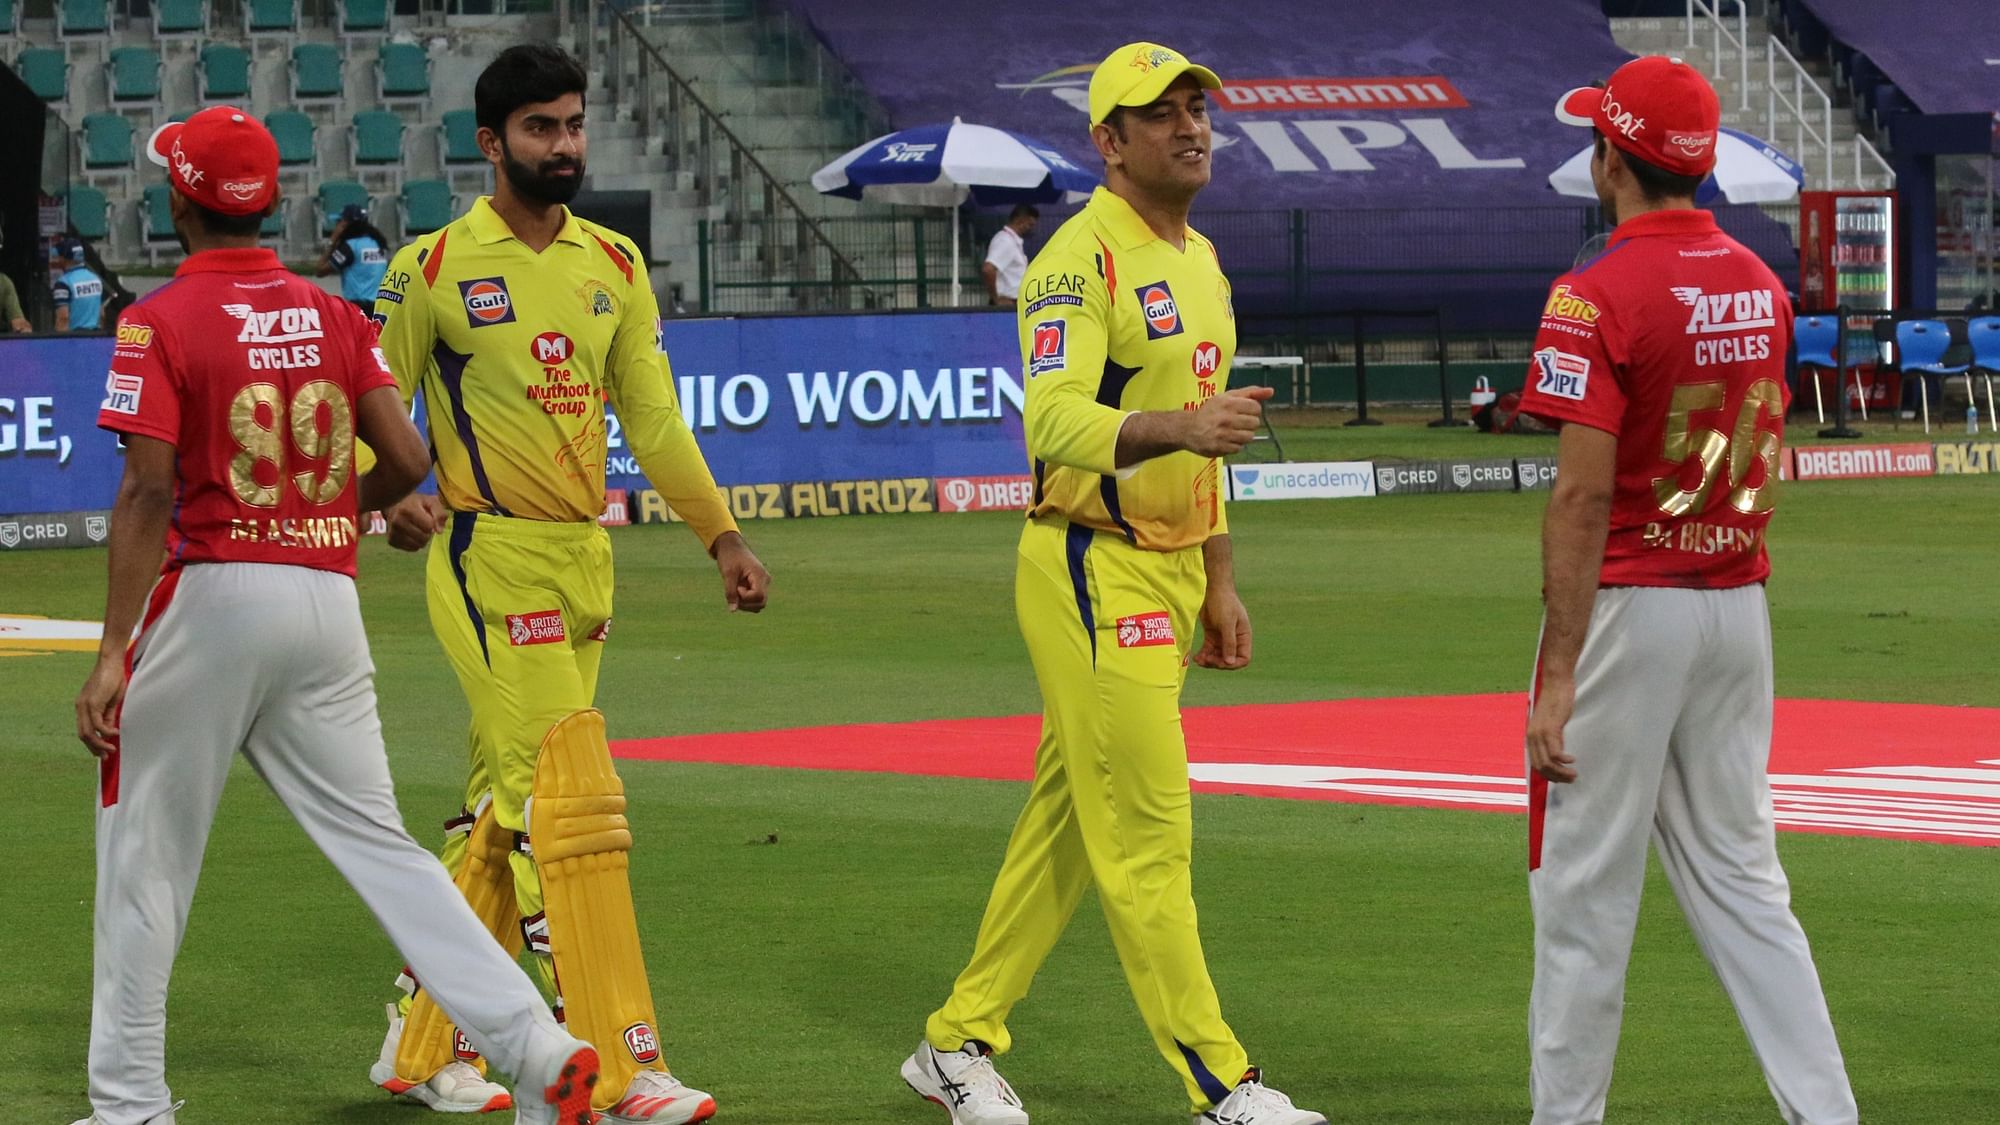 Chennai Super Kings defeated Kings XI Punjab by 9 wickets.